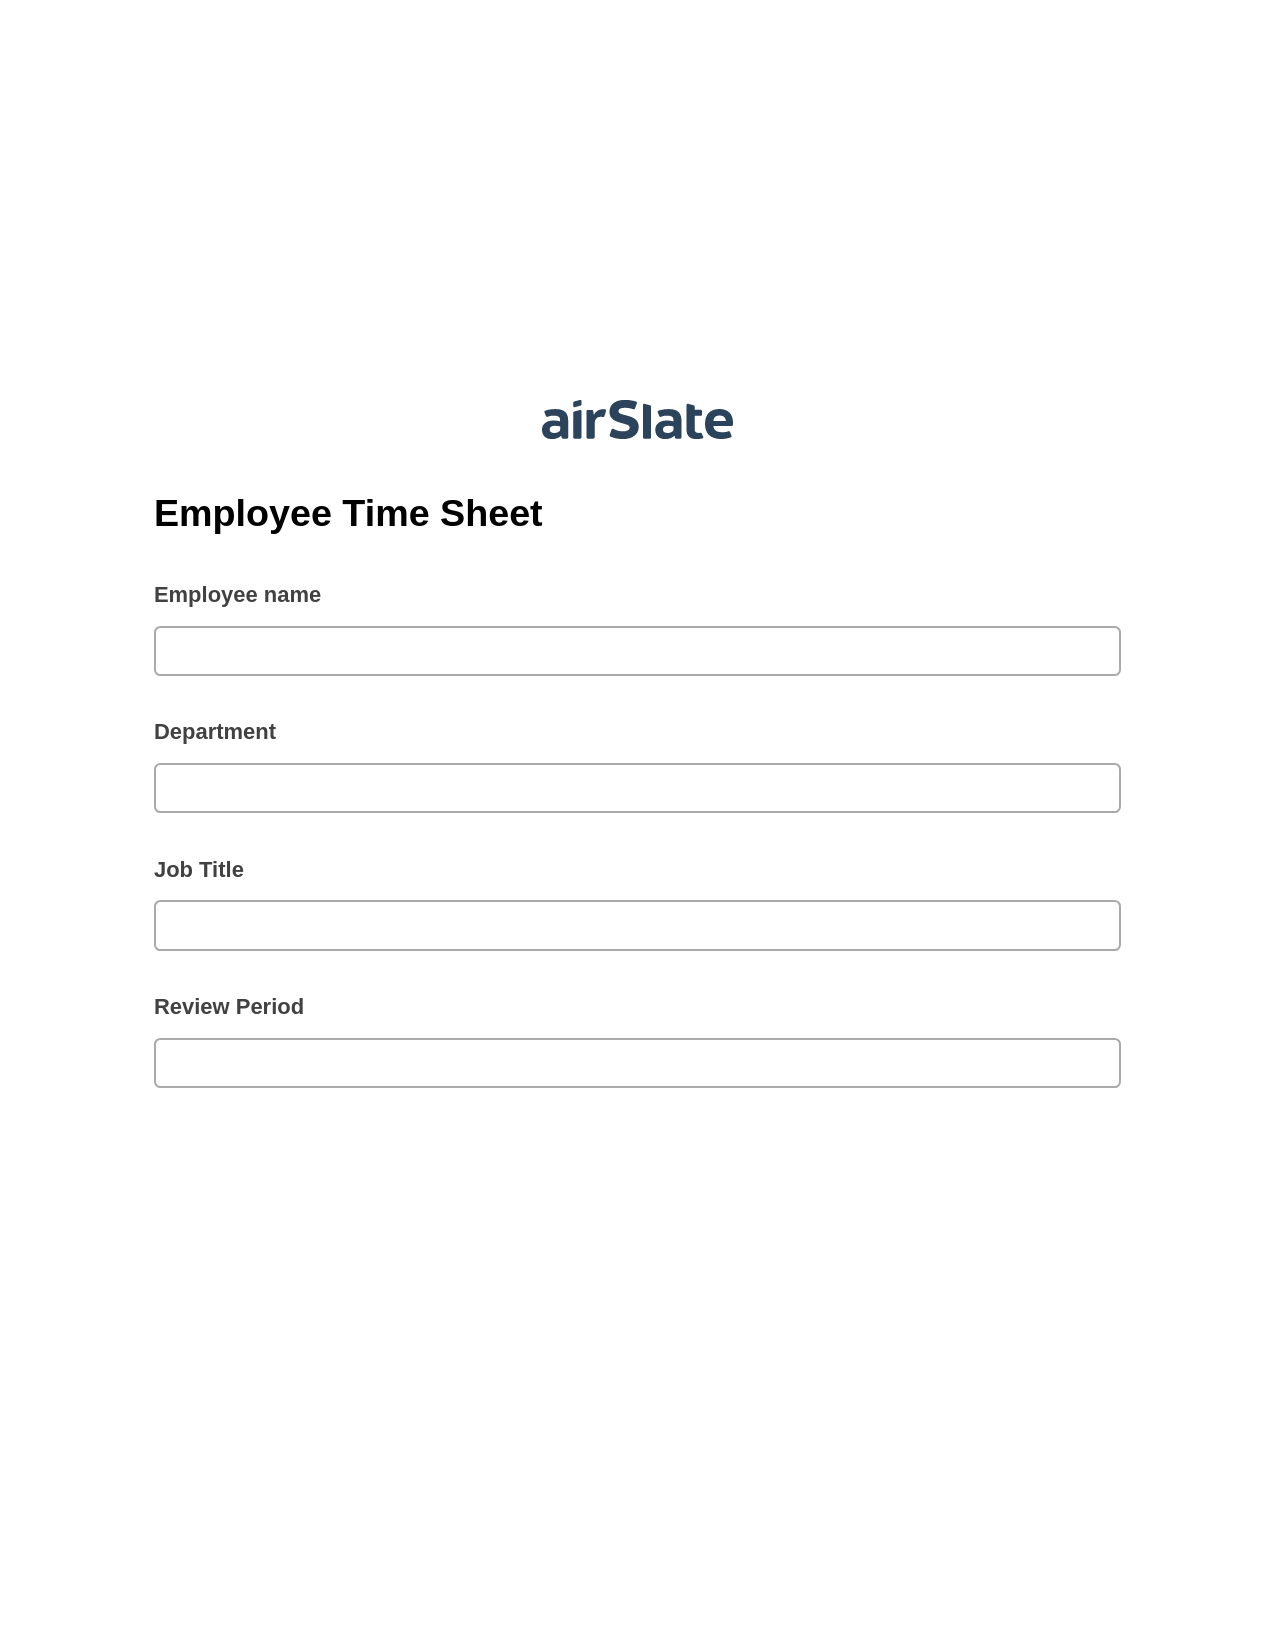 Employee Time Sheet Pre-fill from MySQL Bot, Create Salesforce Records Bot, Archive to Dropbox Bot